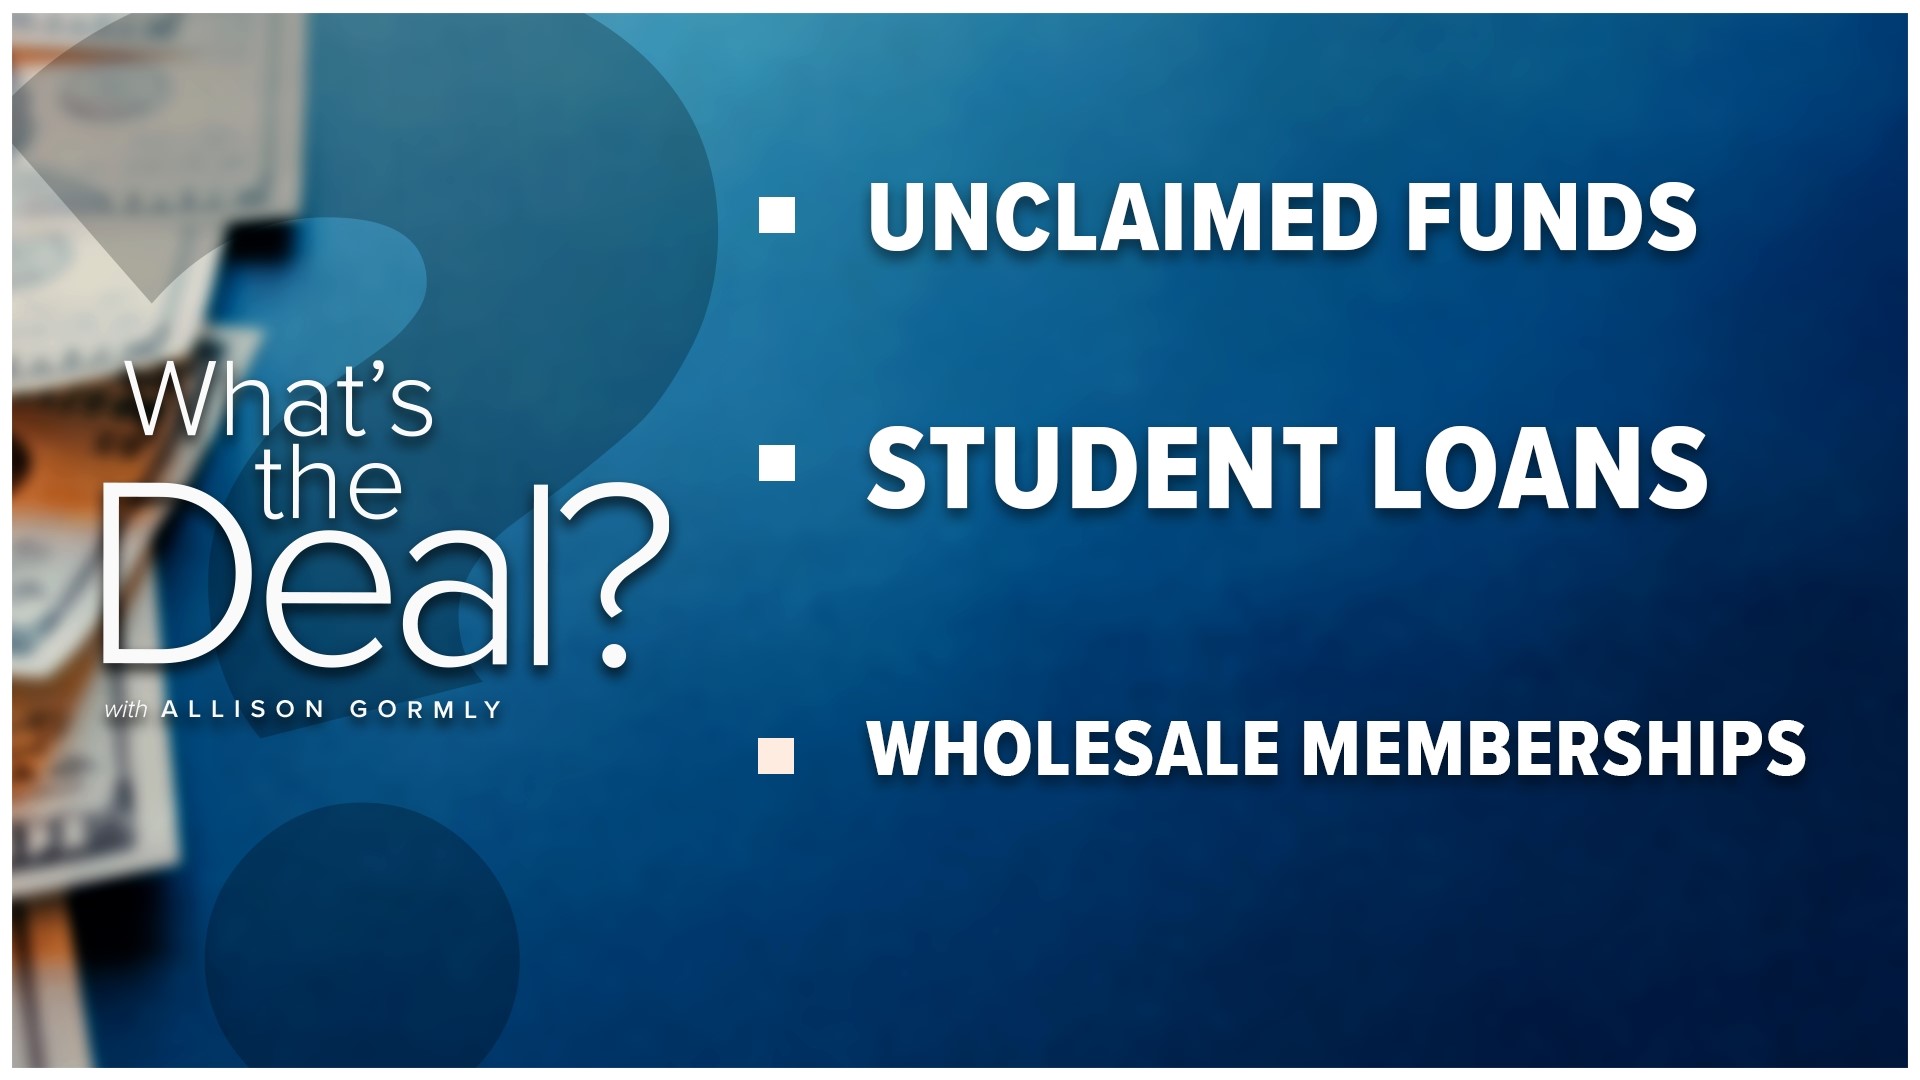 What you need to know about unclaimed funds and how you can see what is available in your state, plus more on student loans and wholesale memberships.